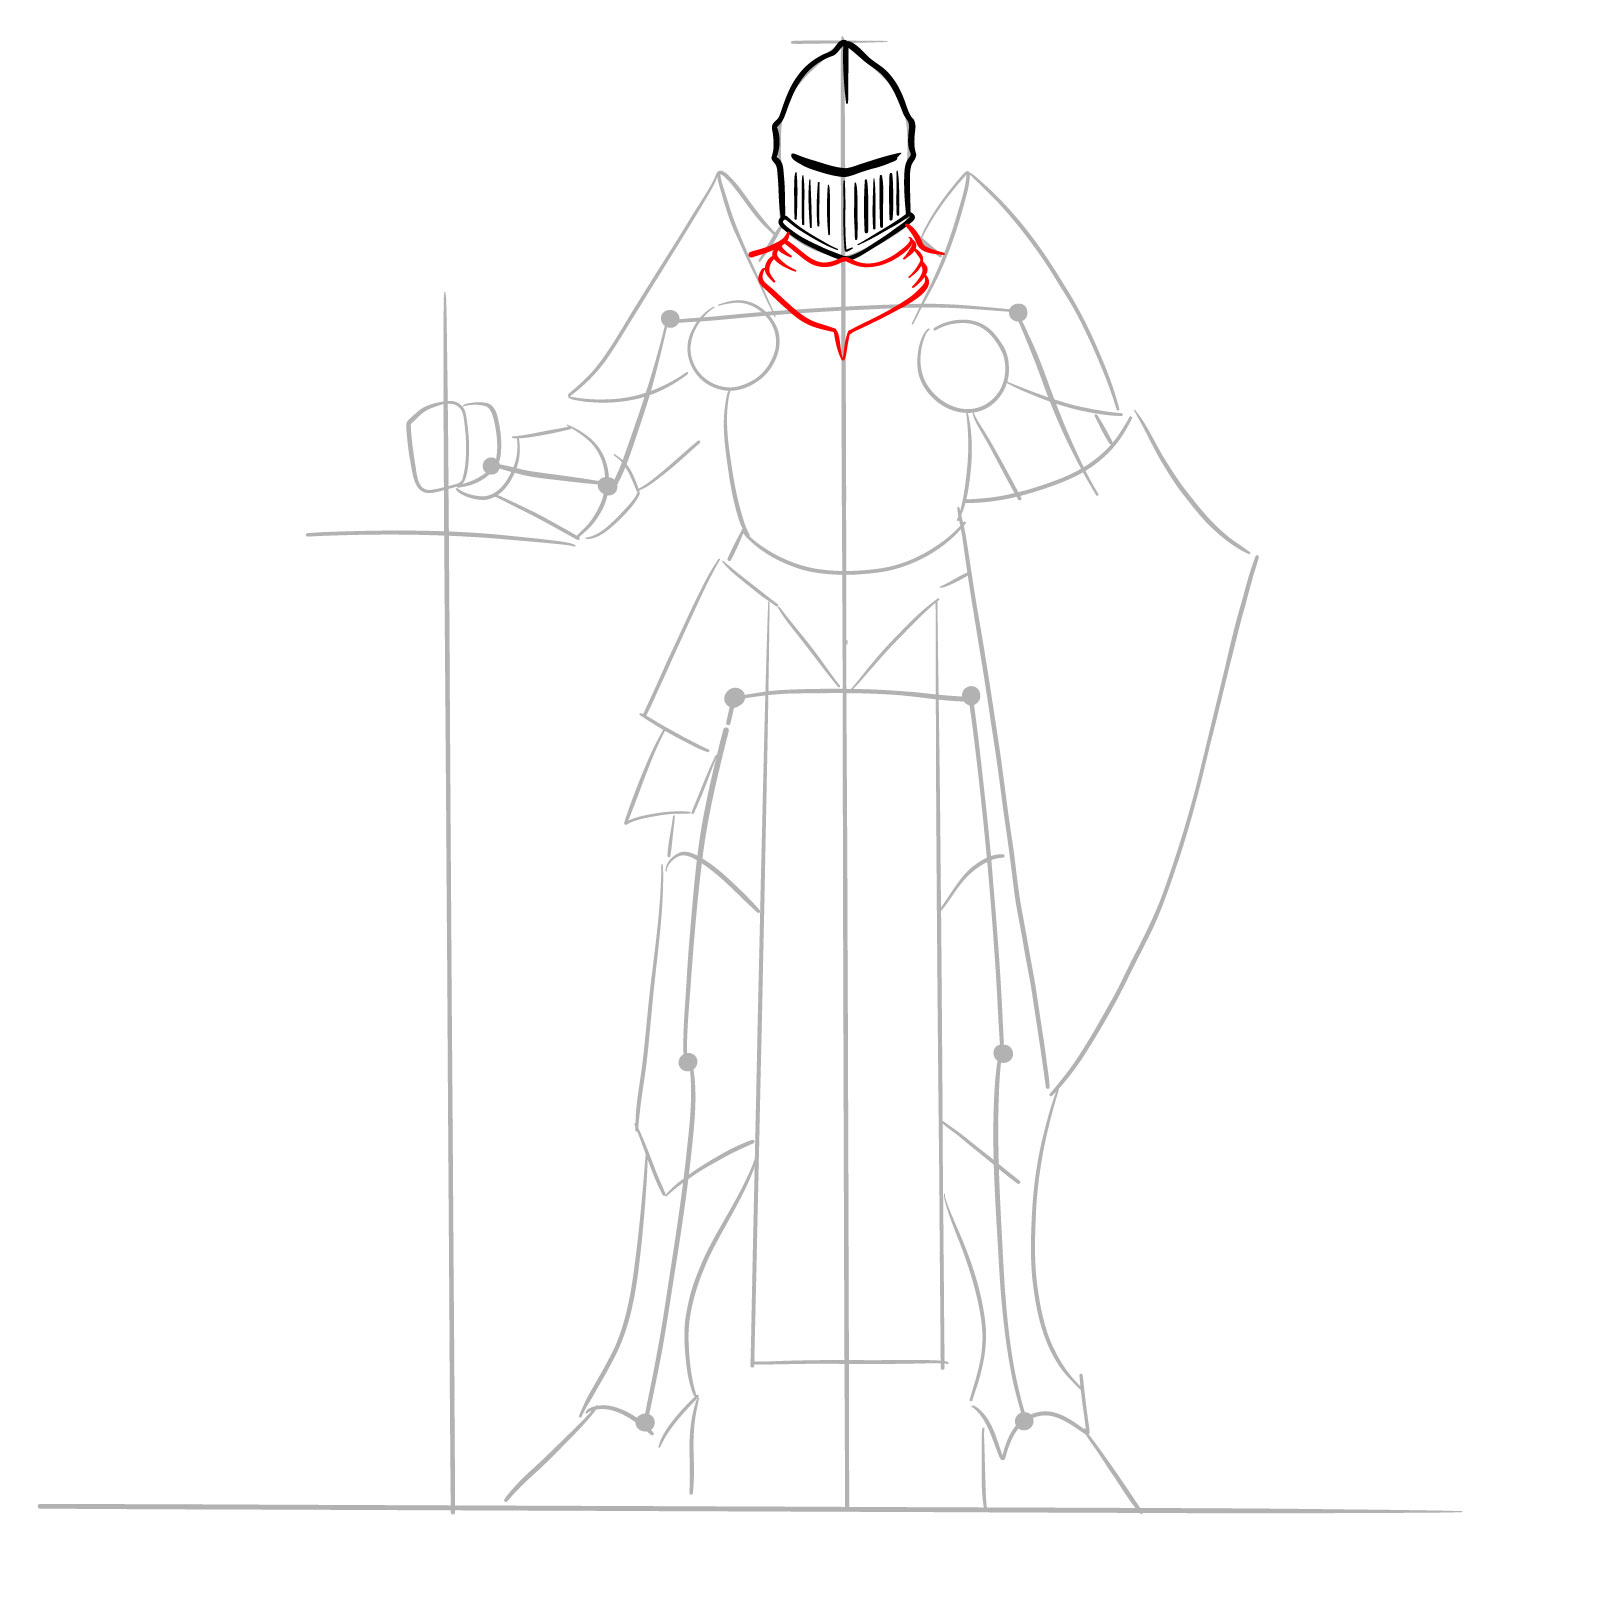 Realistic male paladin drawing step 6: neck and neck armor